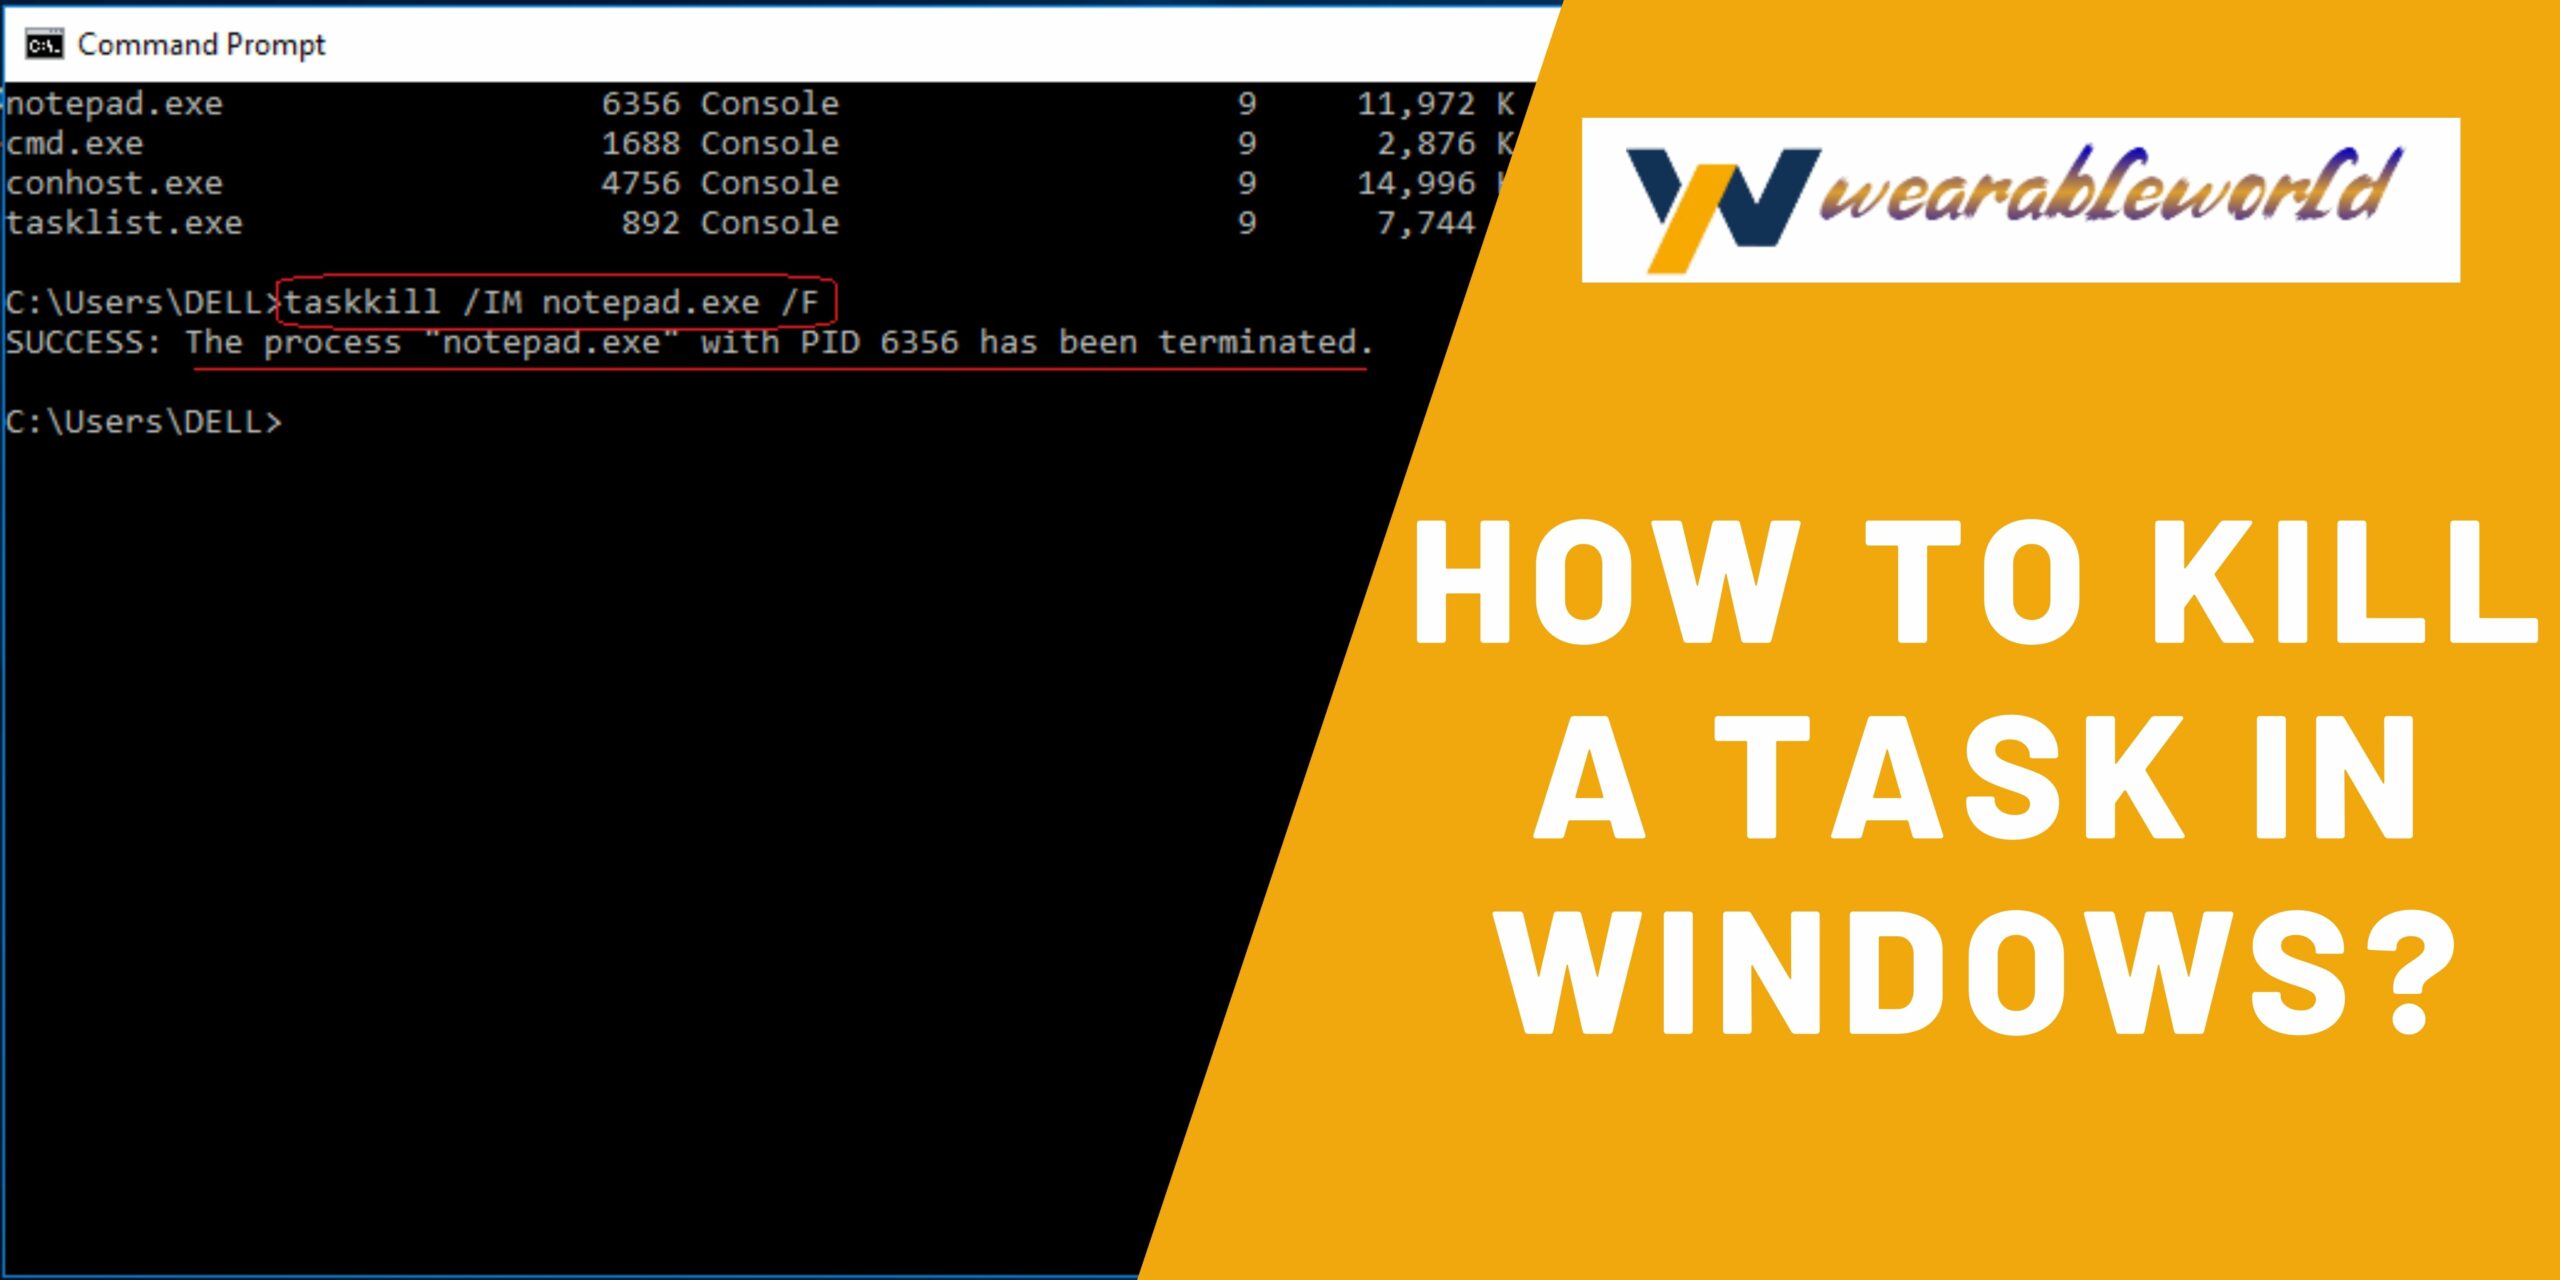 How to kill a task in Windows